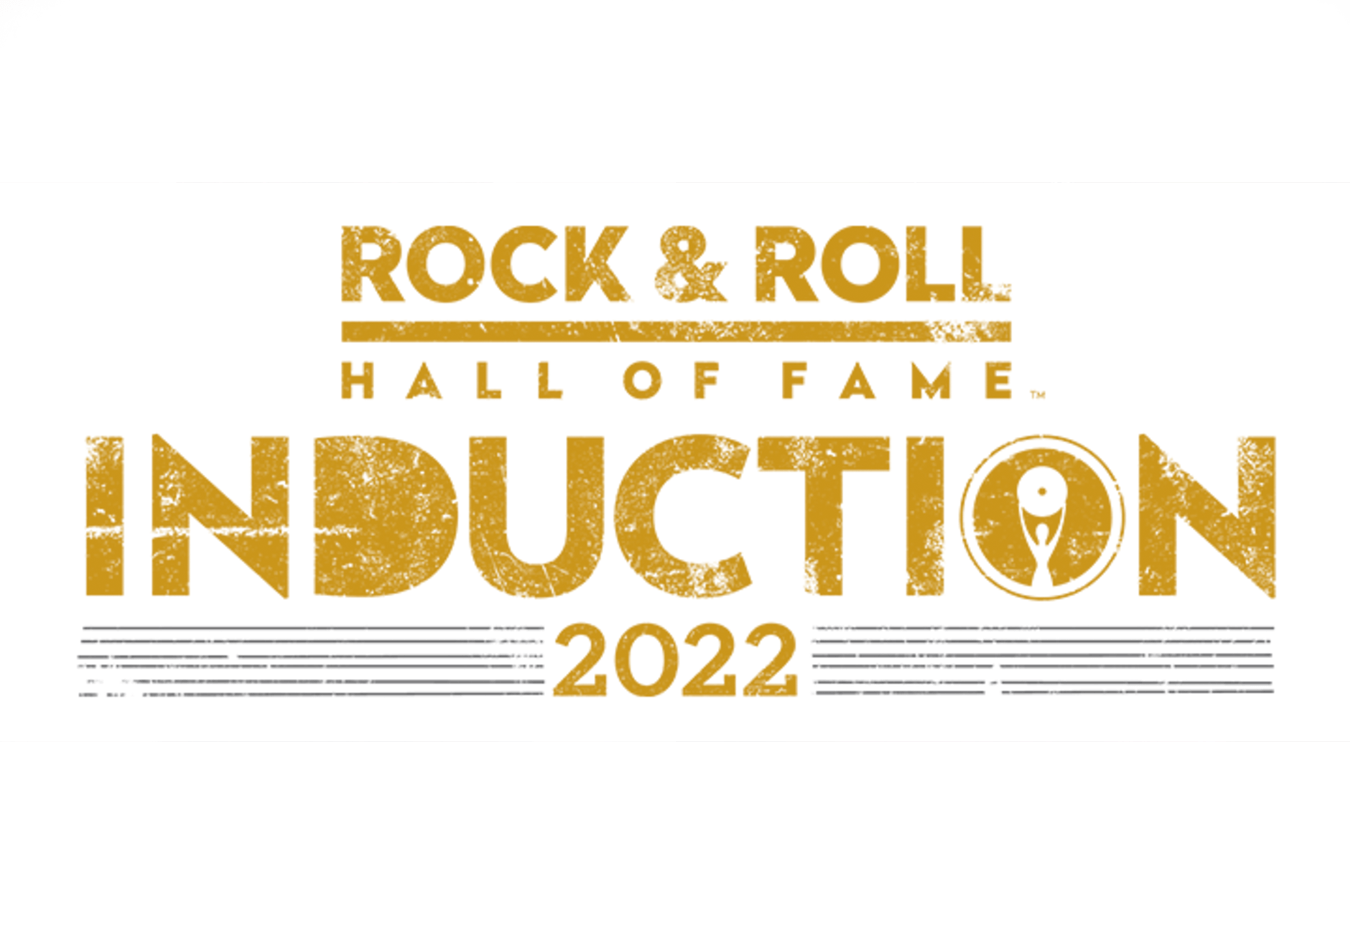 Nominations for Rock Hall of Fame 2022